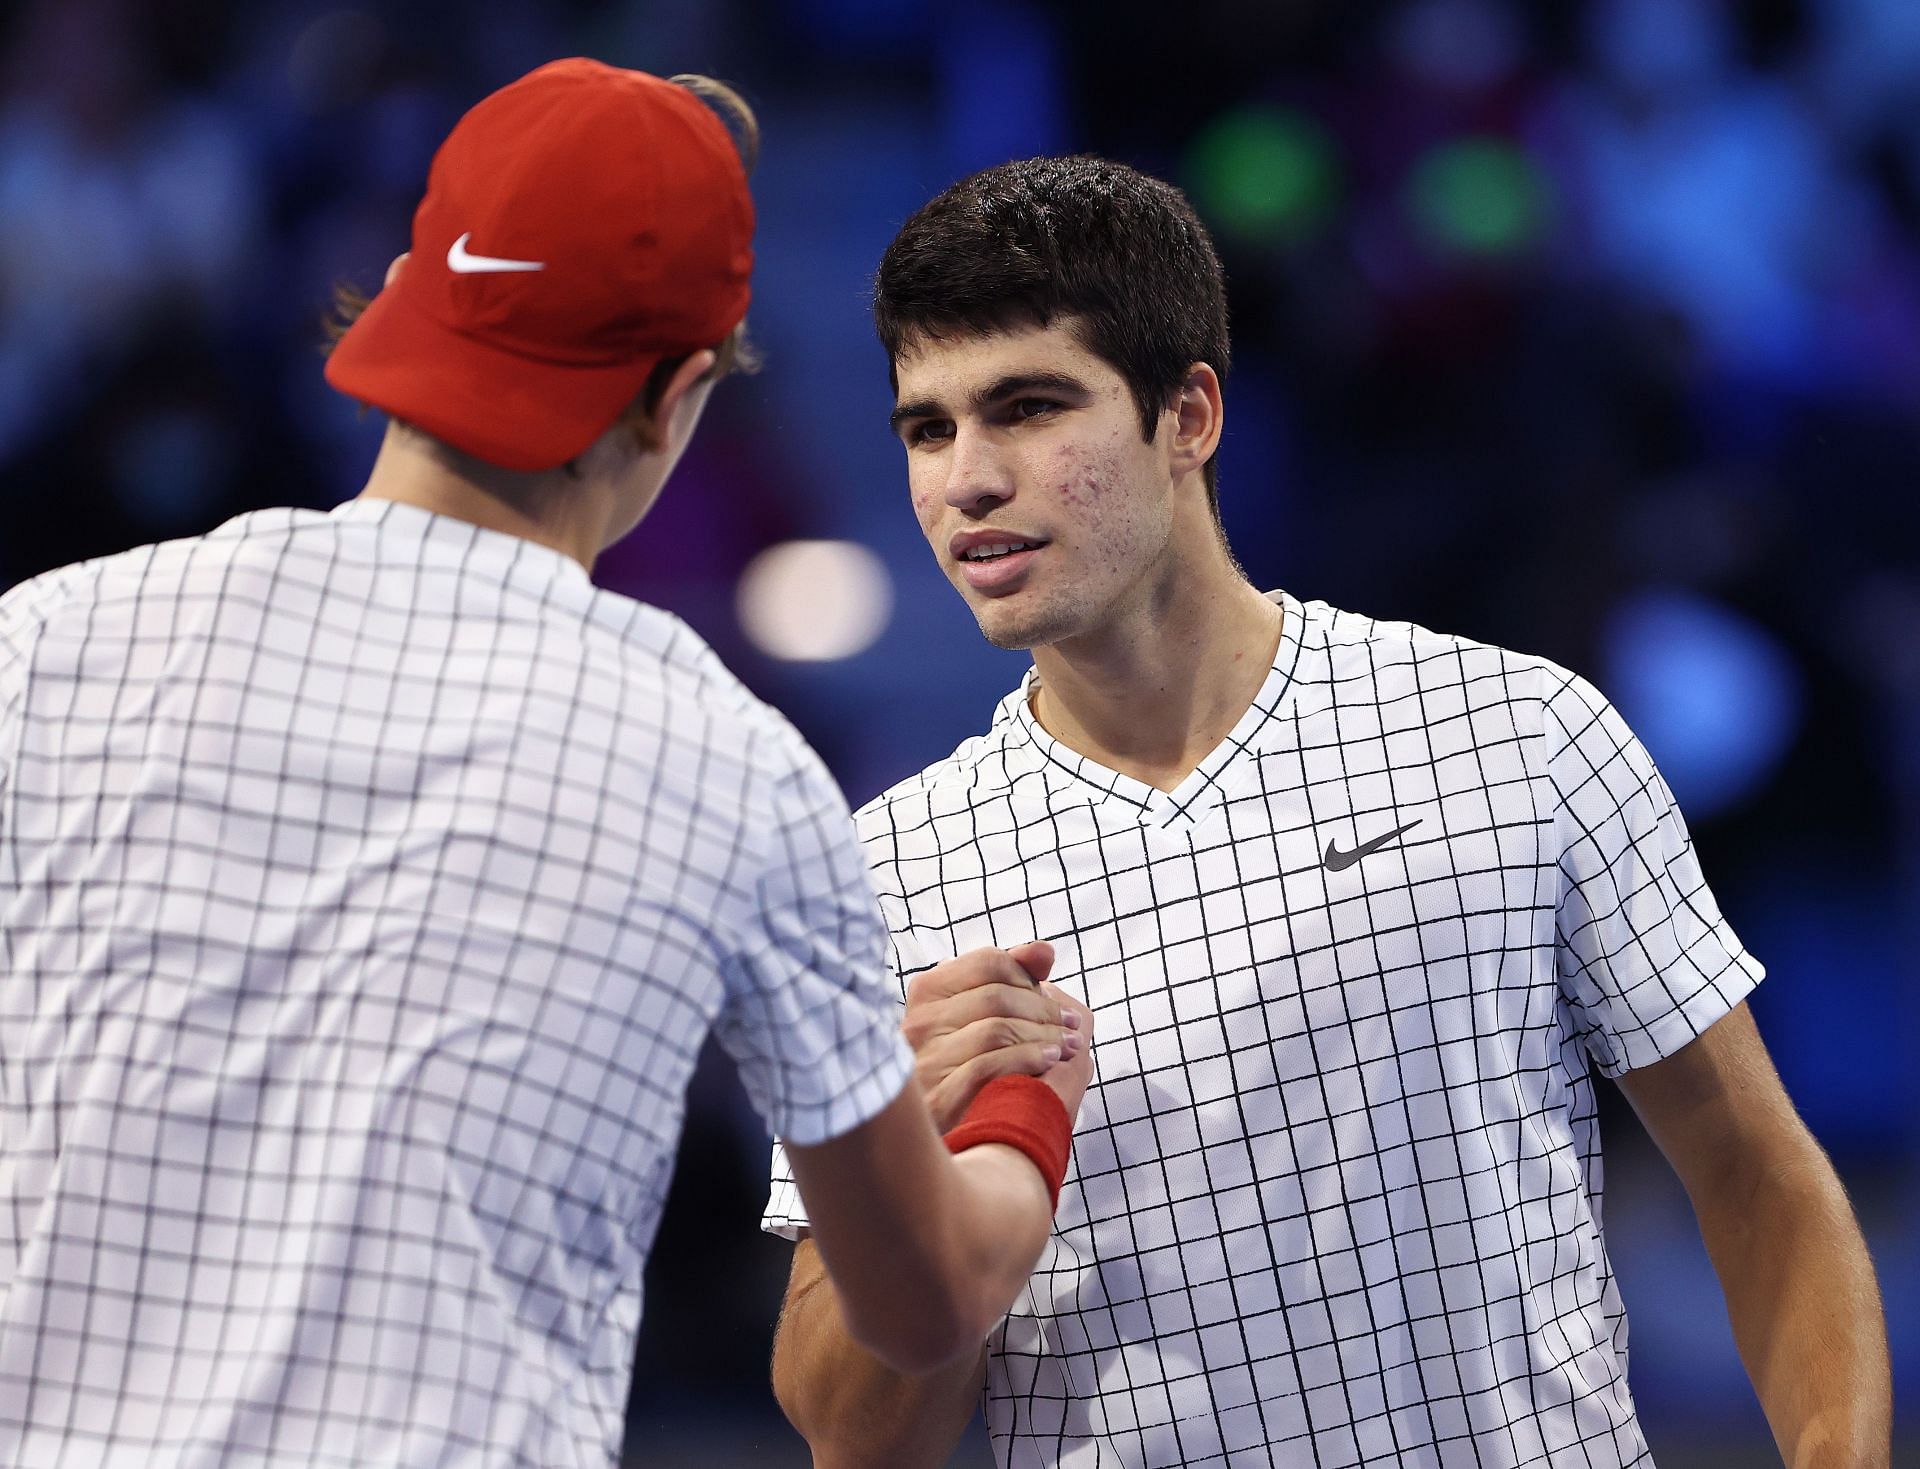 Carlos Alcaraz and Holger Rune pictured at the Next Gen ATP Finals.